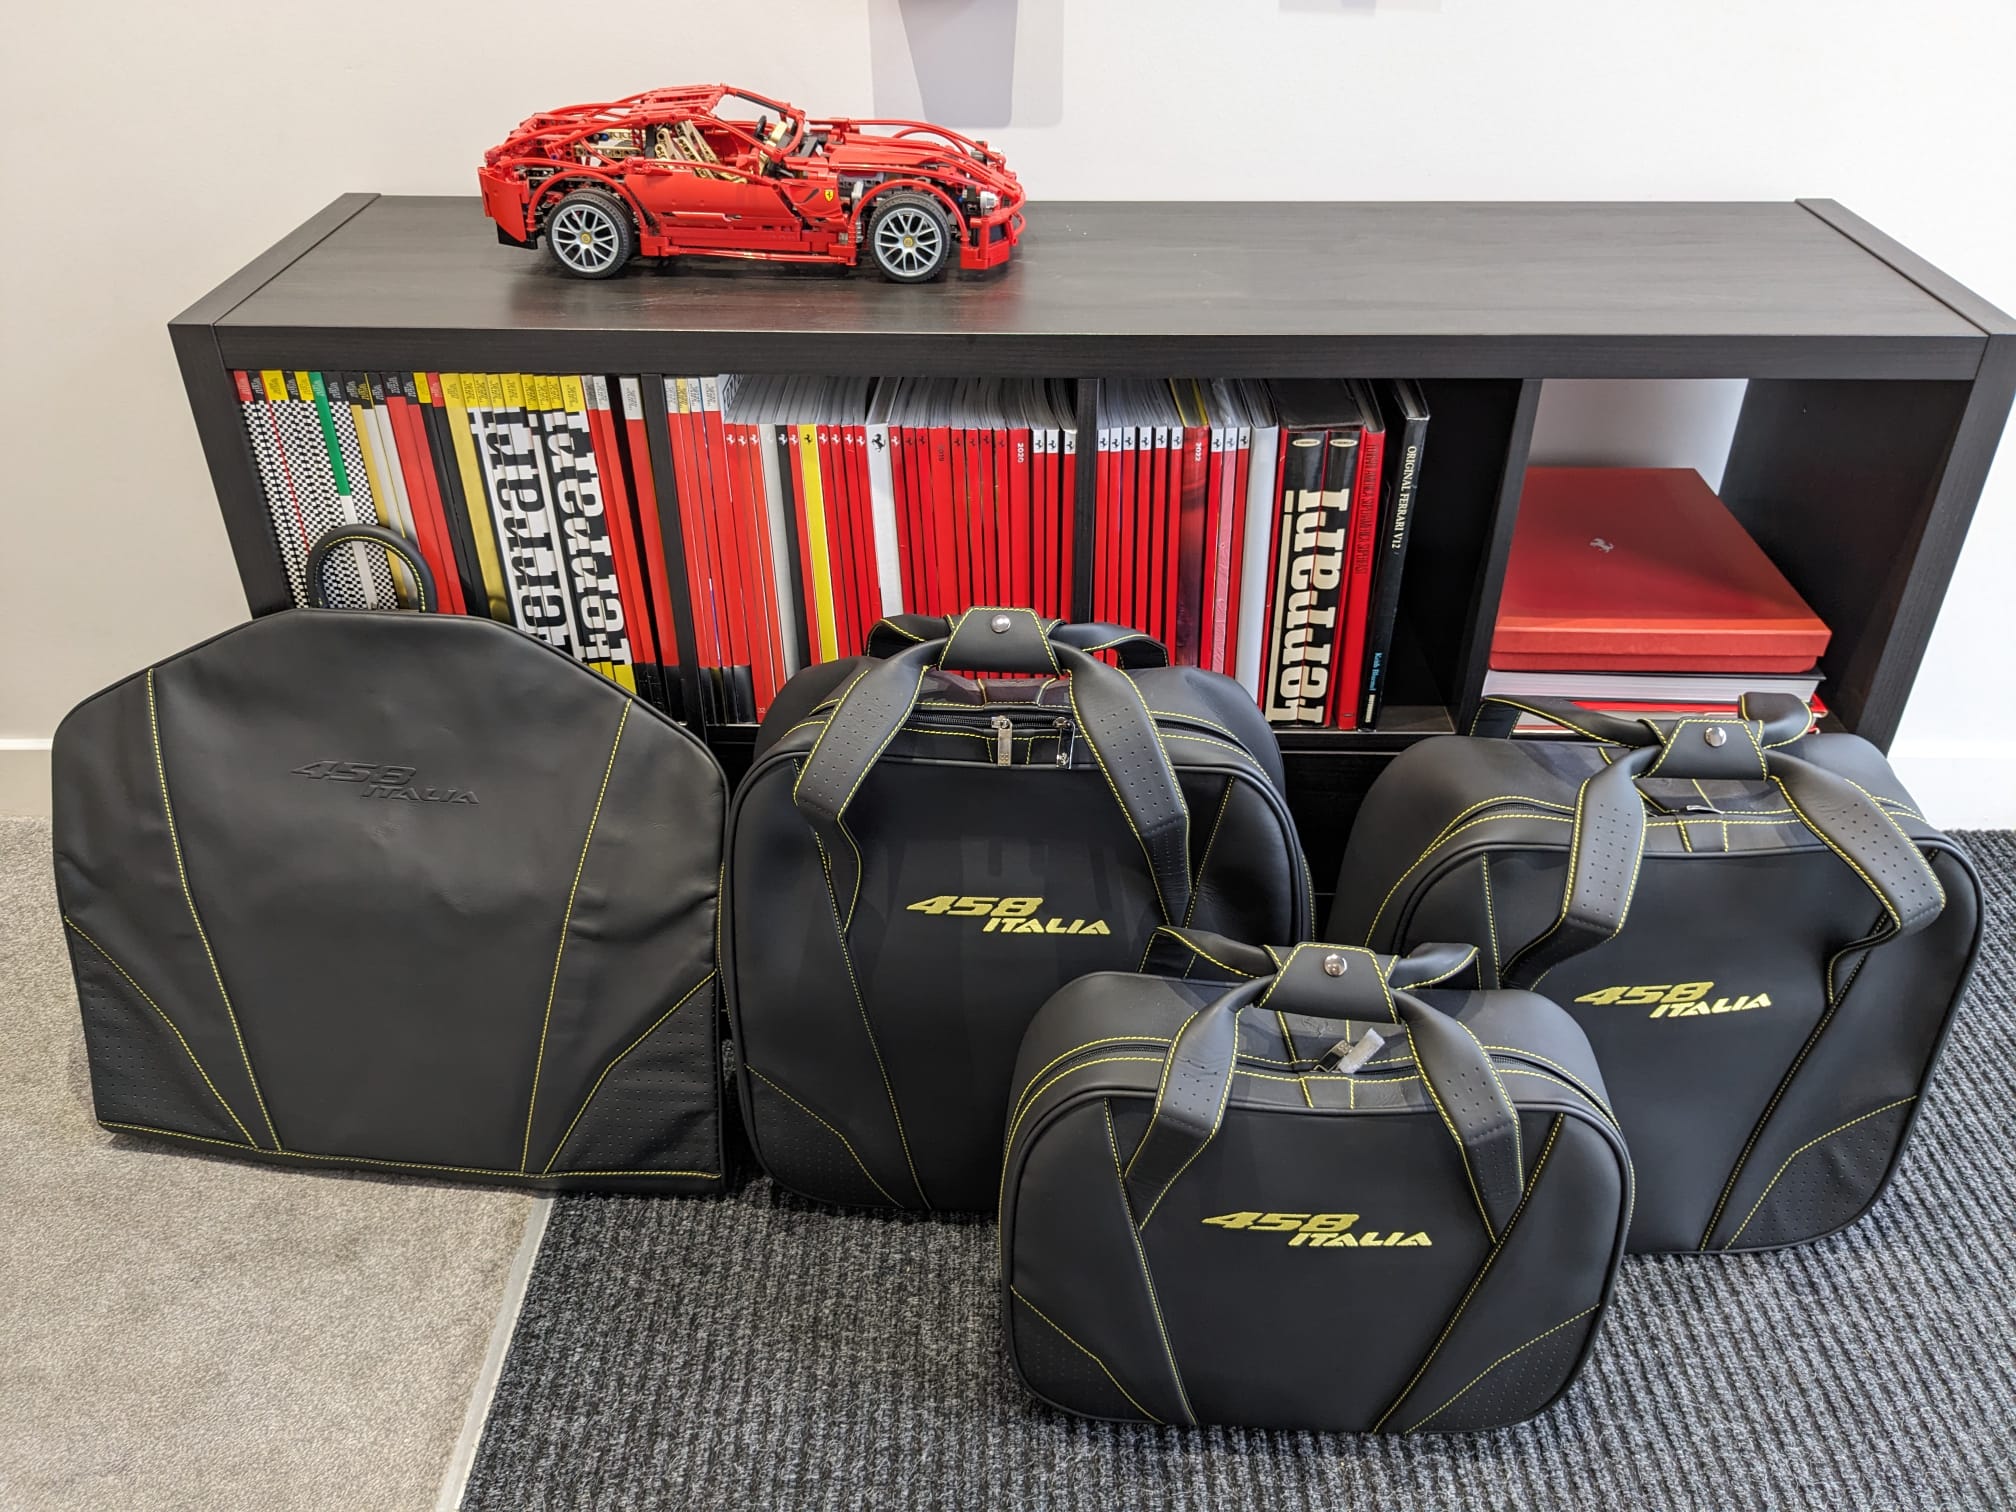 Schedoni Luggage For Ferrari 458 Italia for sale by auction in 